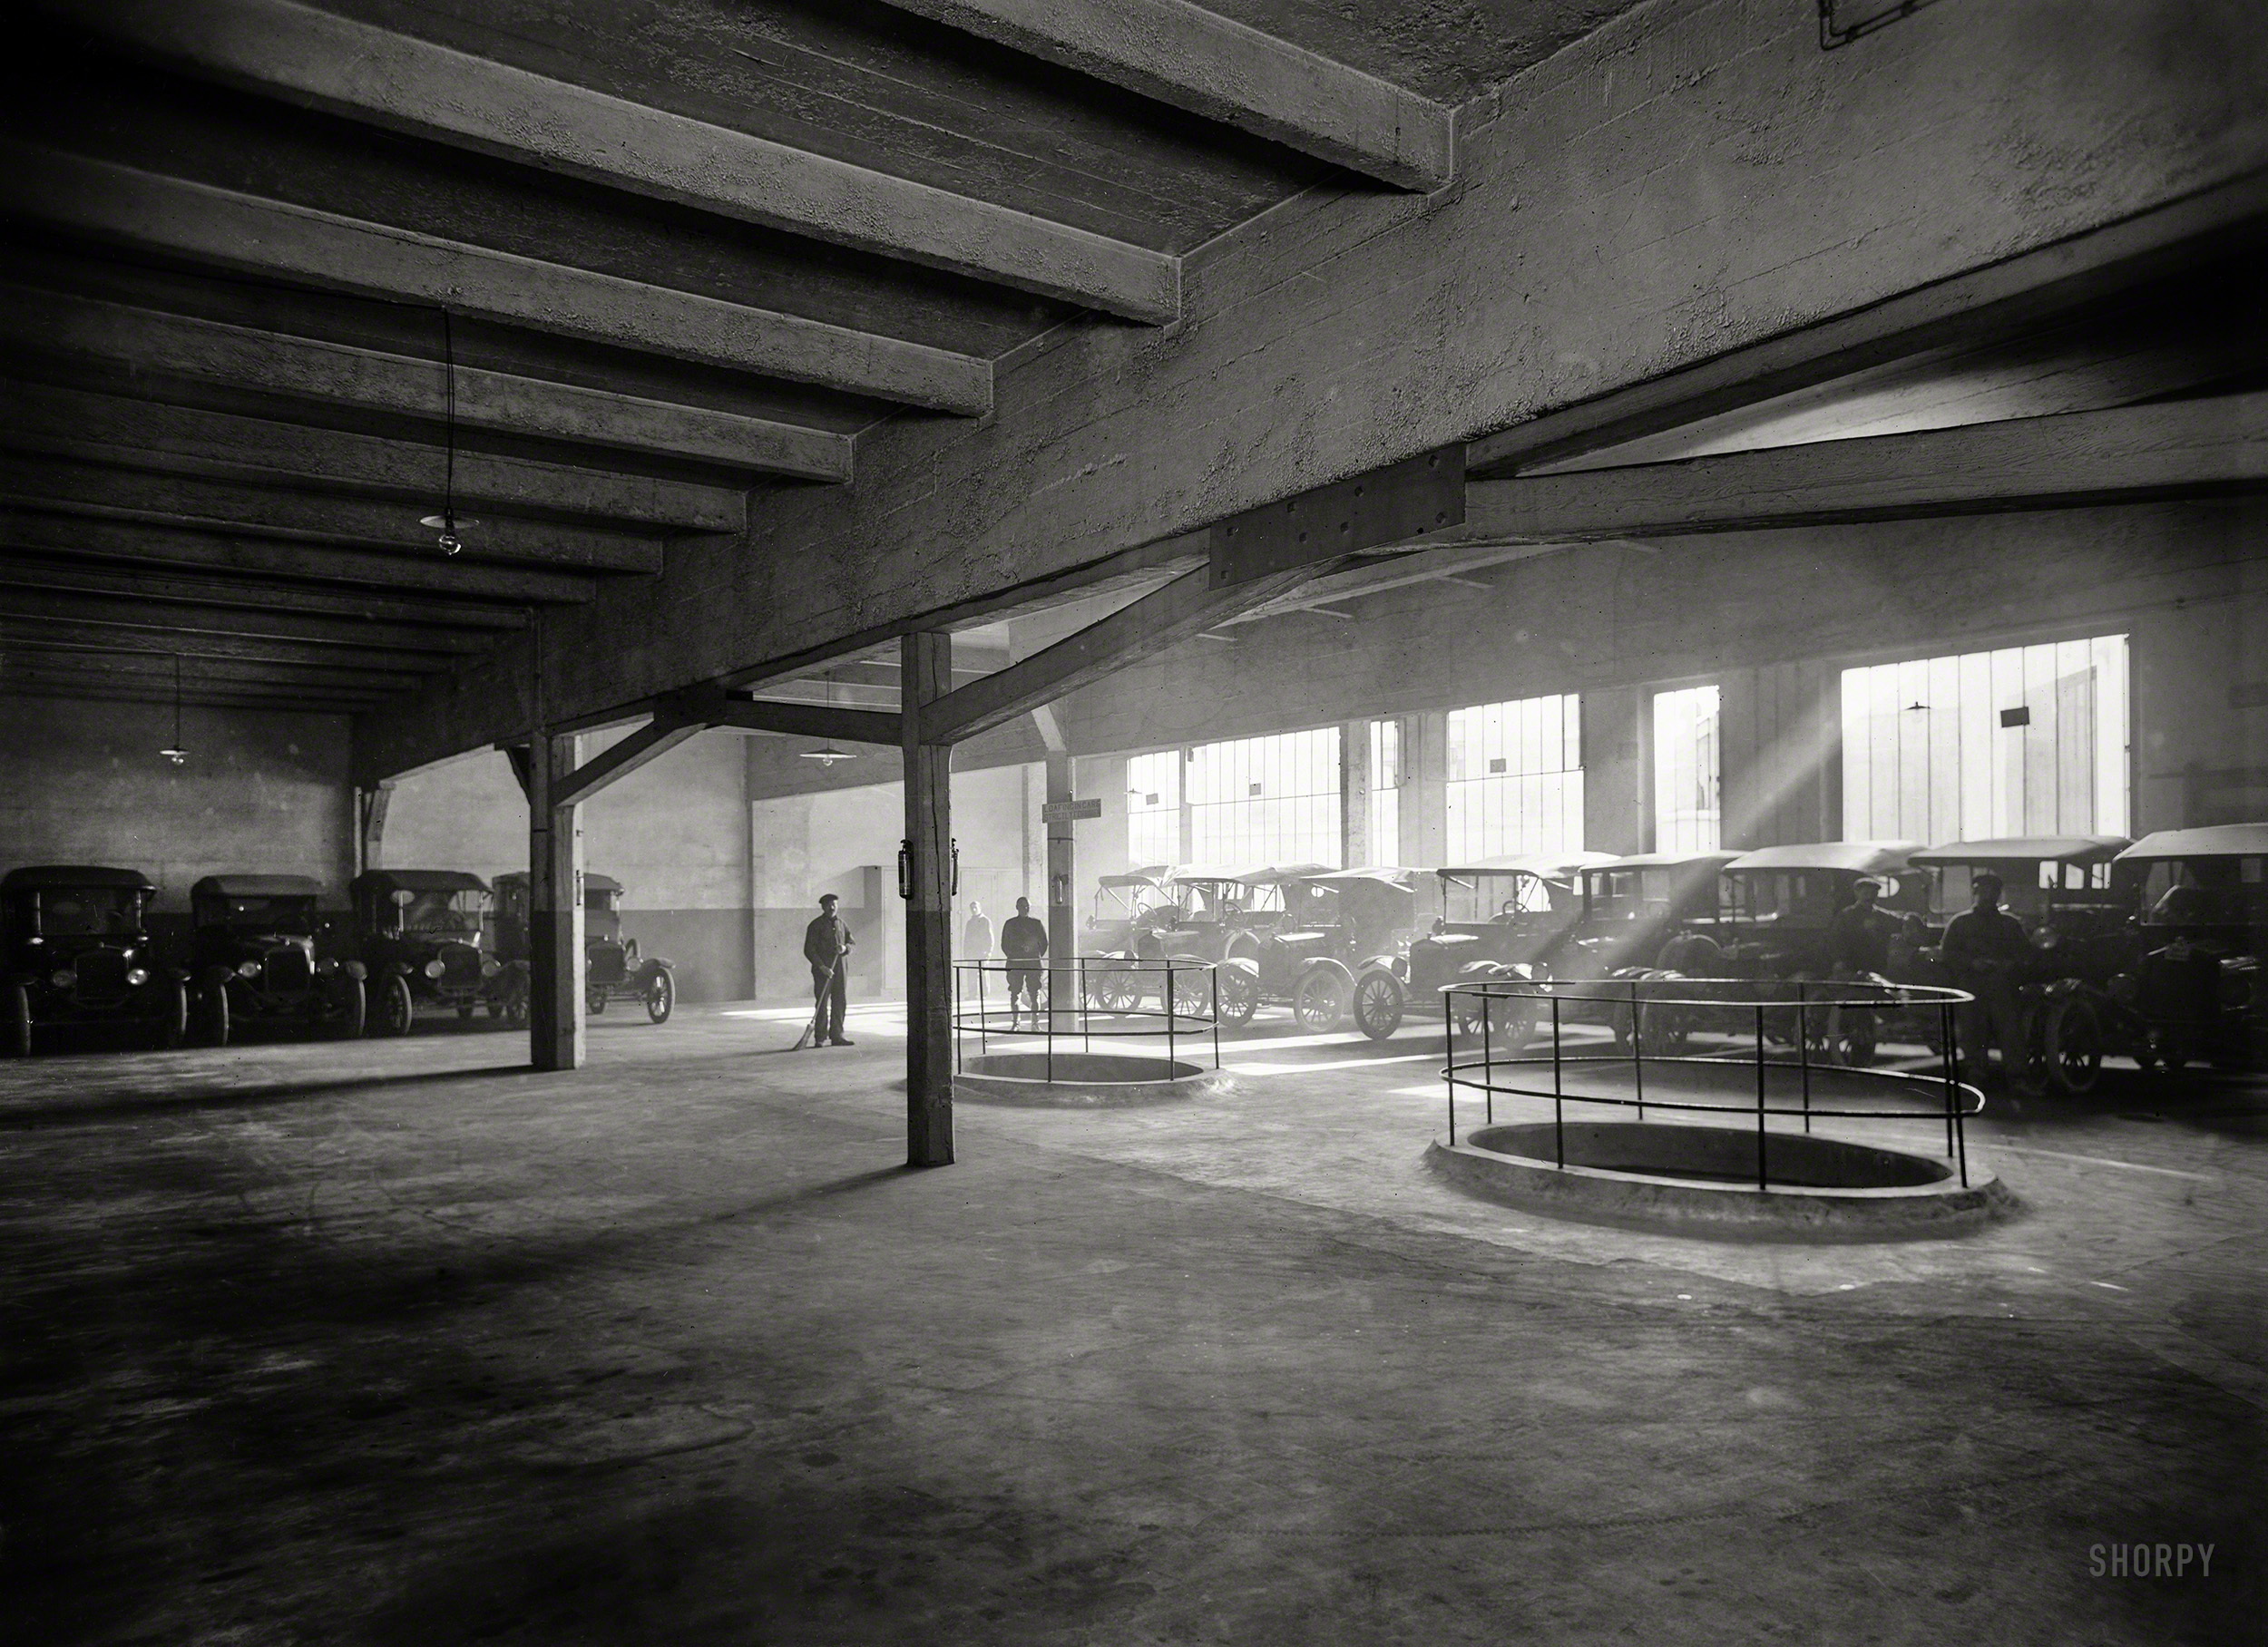 March 17, 1919. "Paris. Interior of the American Red Cross garage at 79 Rue Laugier." Note the sign advising that LOAFING IN CARS STRICTLY FORBIDDEN. 5x7 inch glass negative, American National Red Cross. View full size.